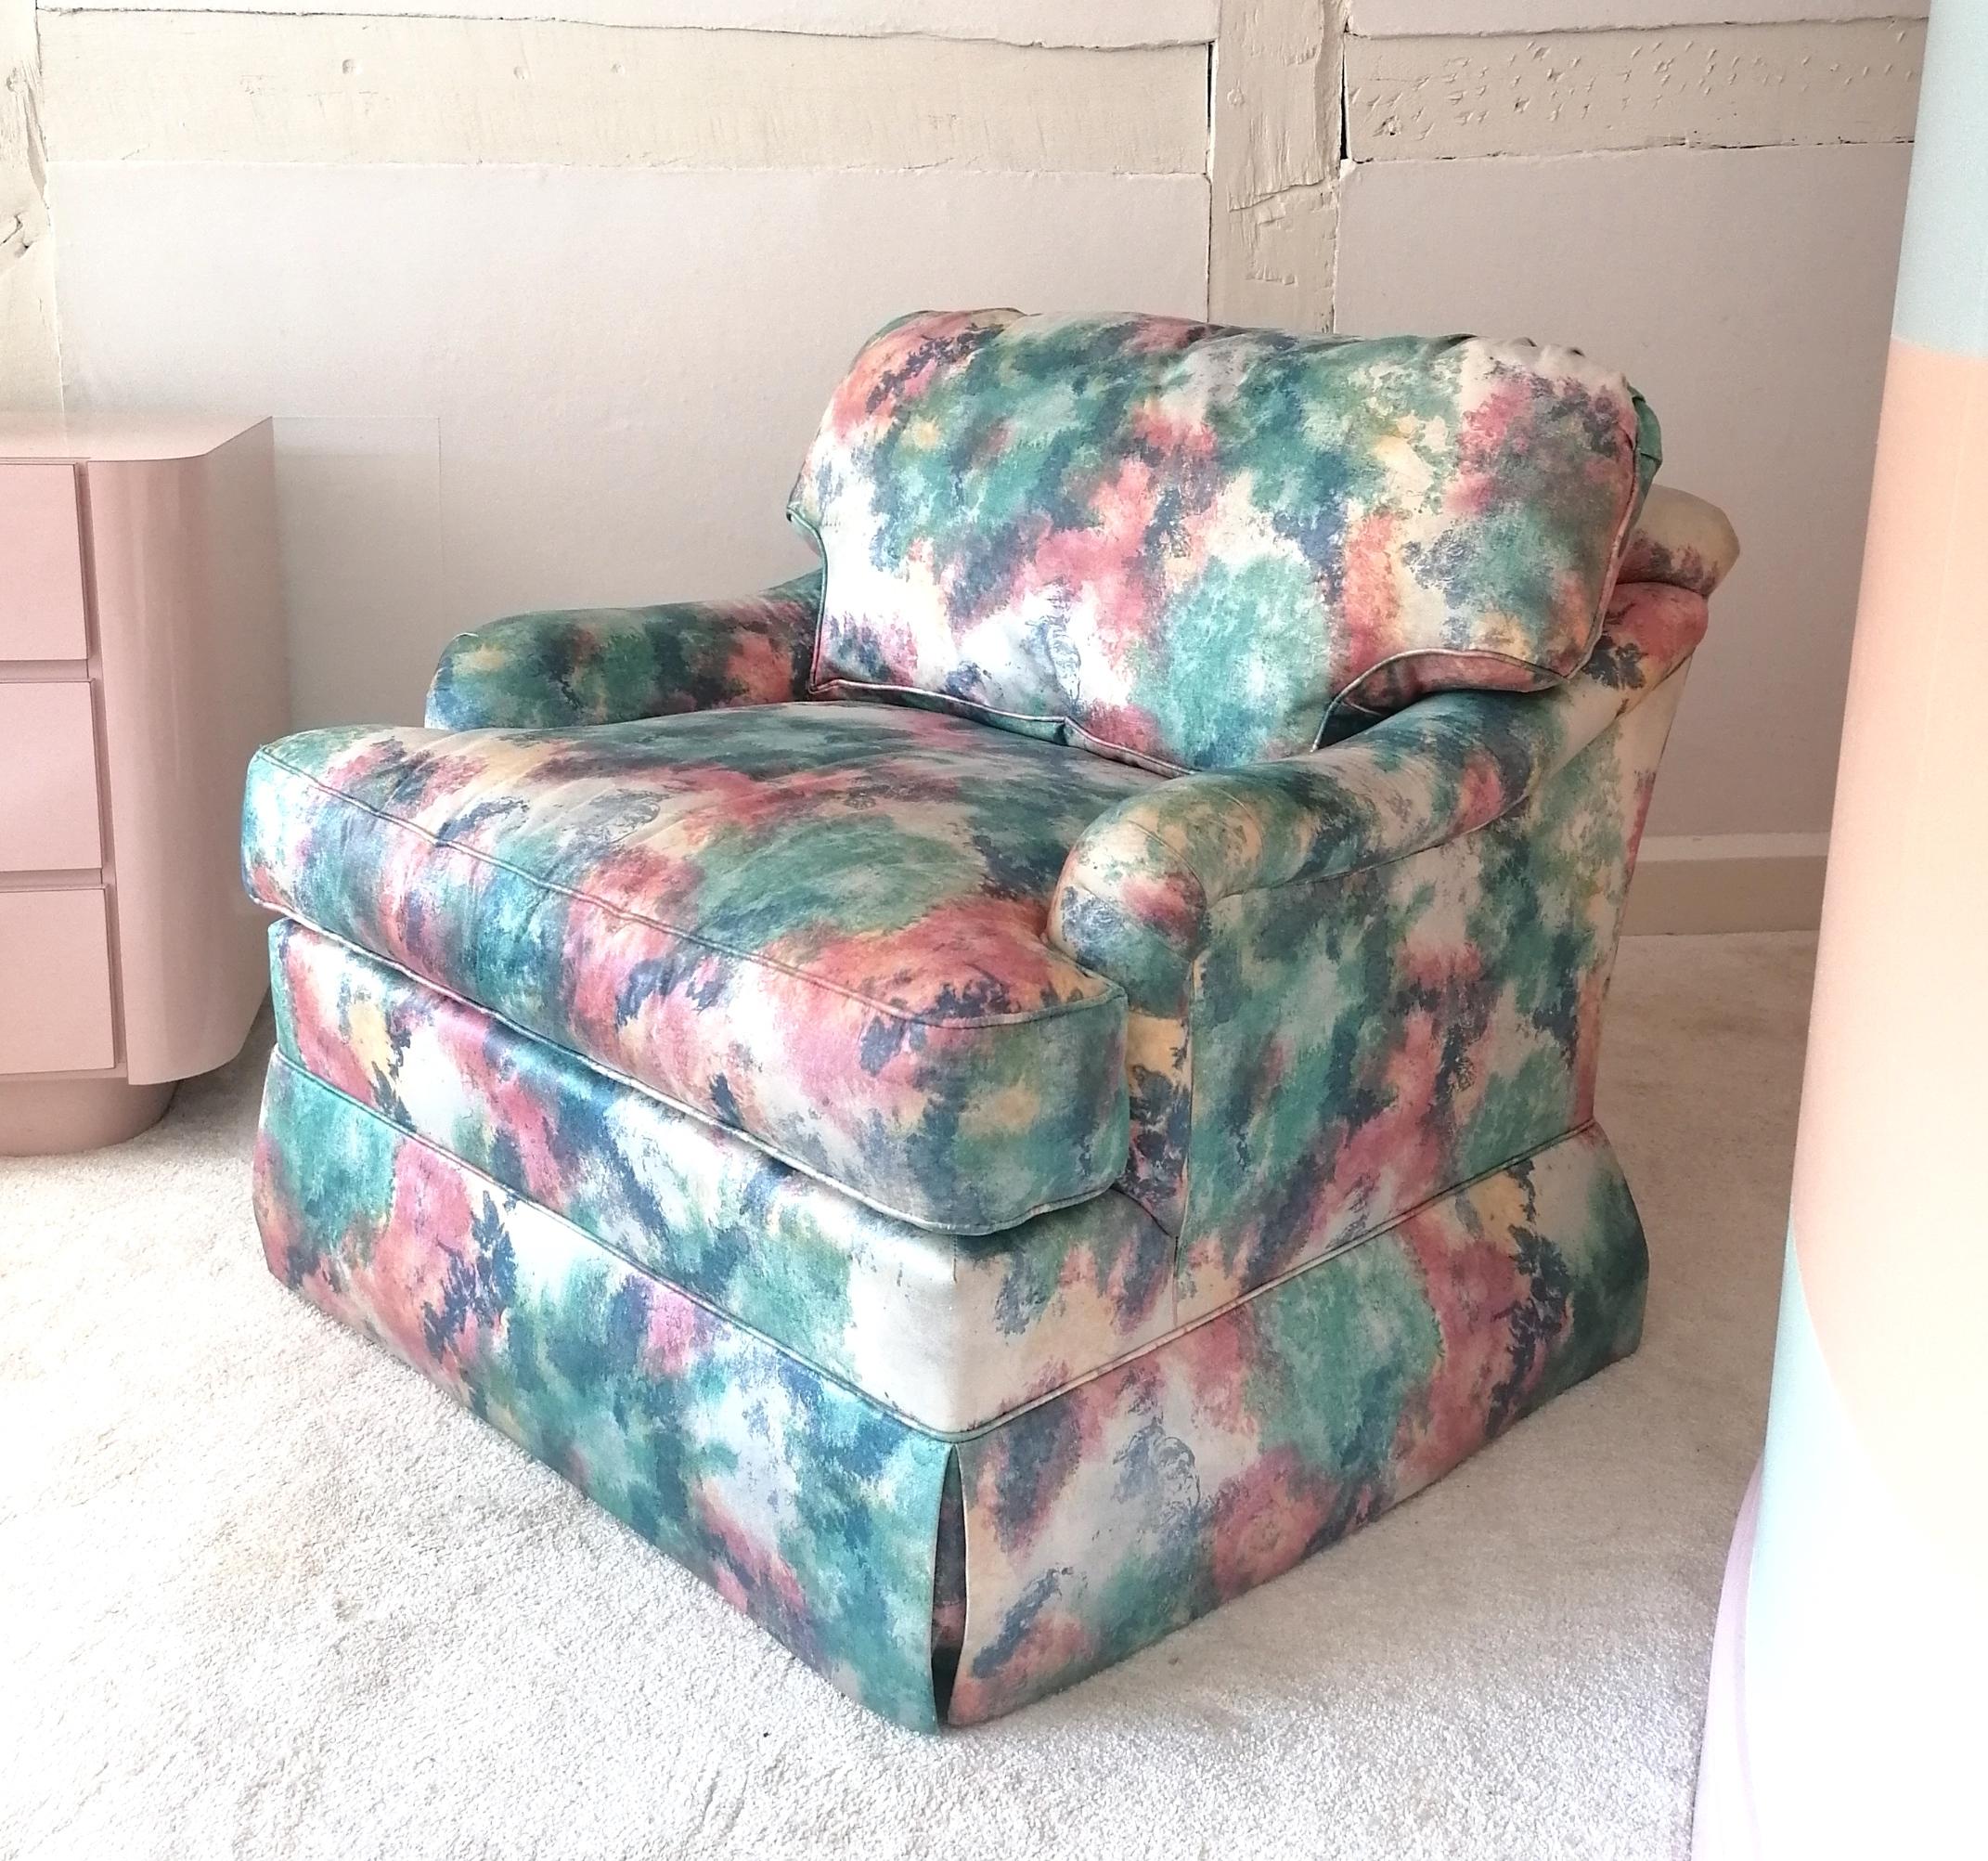 Huge squashy swivelling armchairs. Made by Kravet, USA, late 1970s / early 1980s. They're the most comfortable chairs we've had (down & feather in the cushions) and have their original silky mercerised cotton abstract patterned upholstery...which is